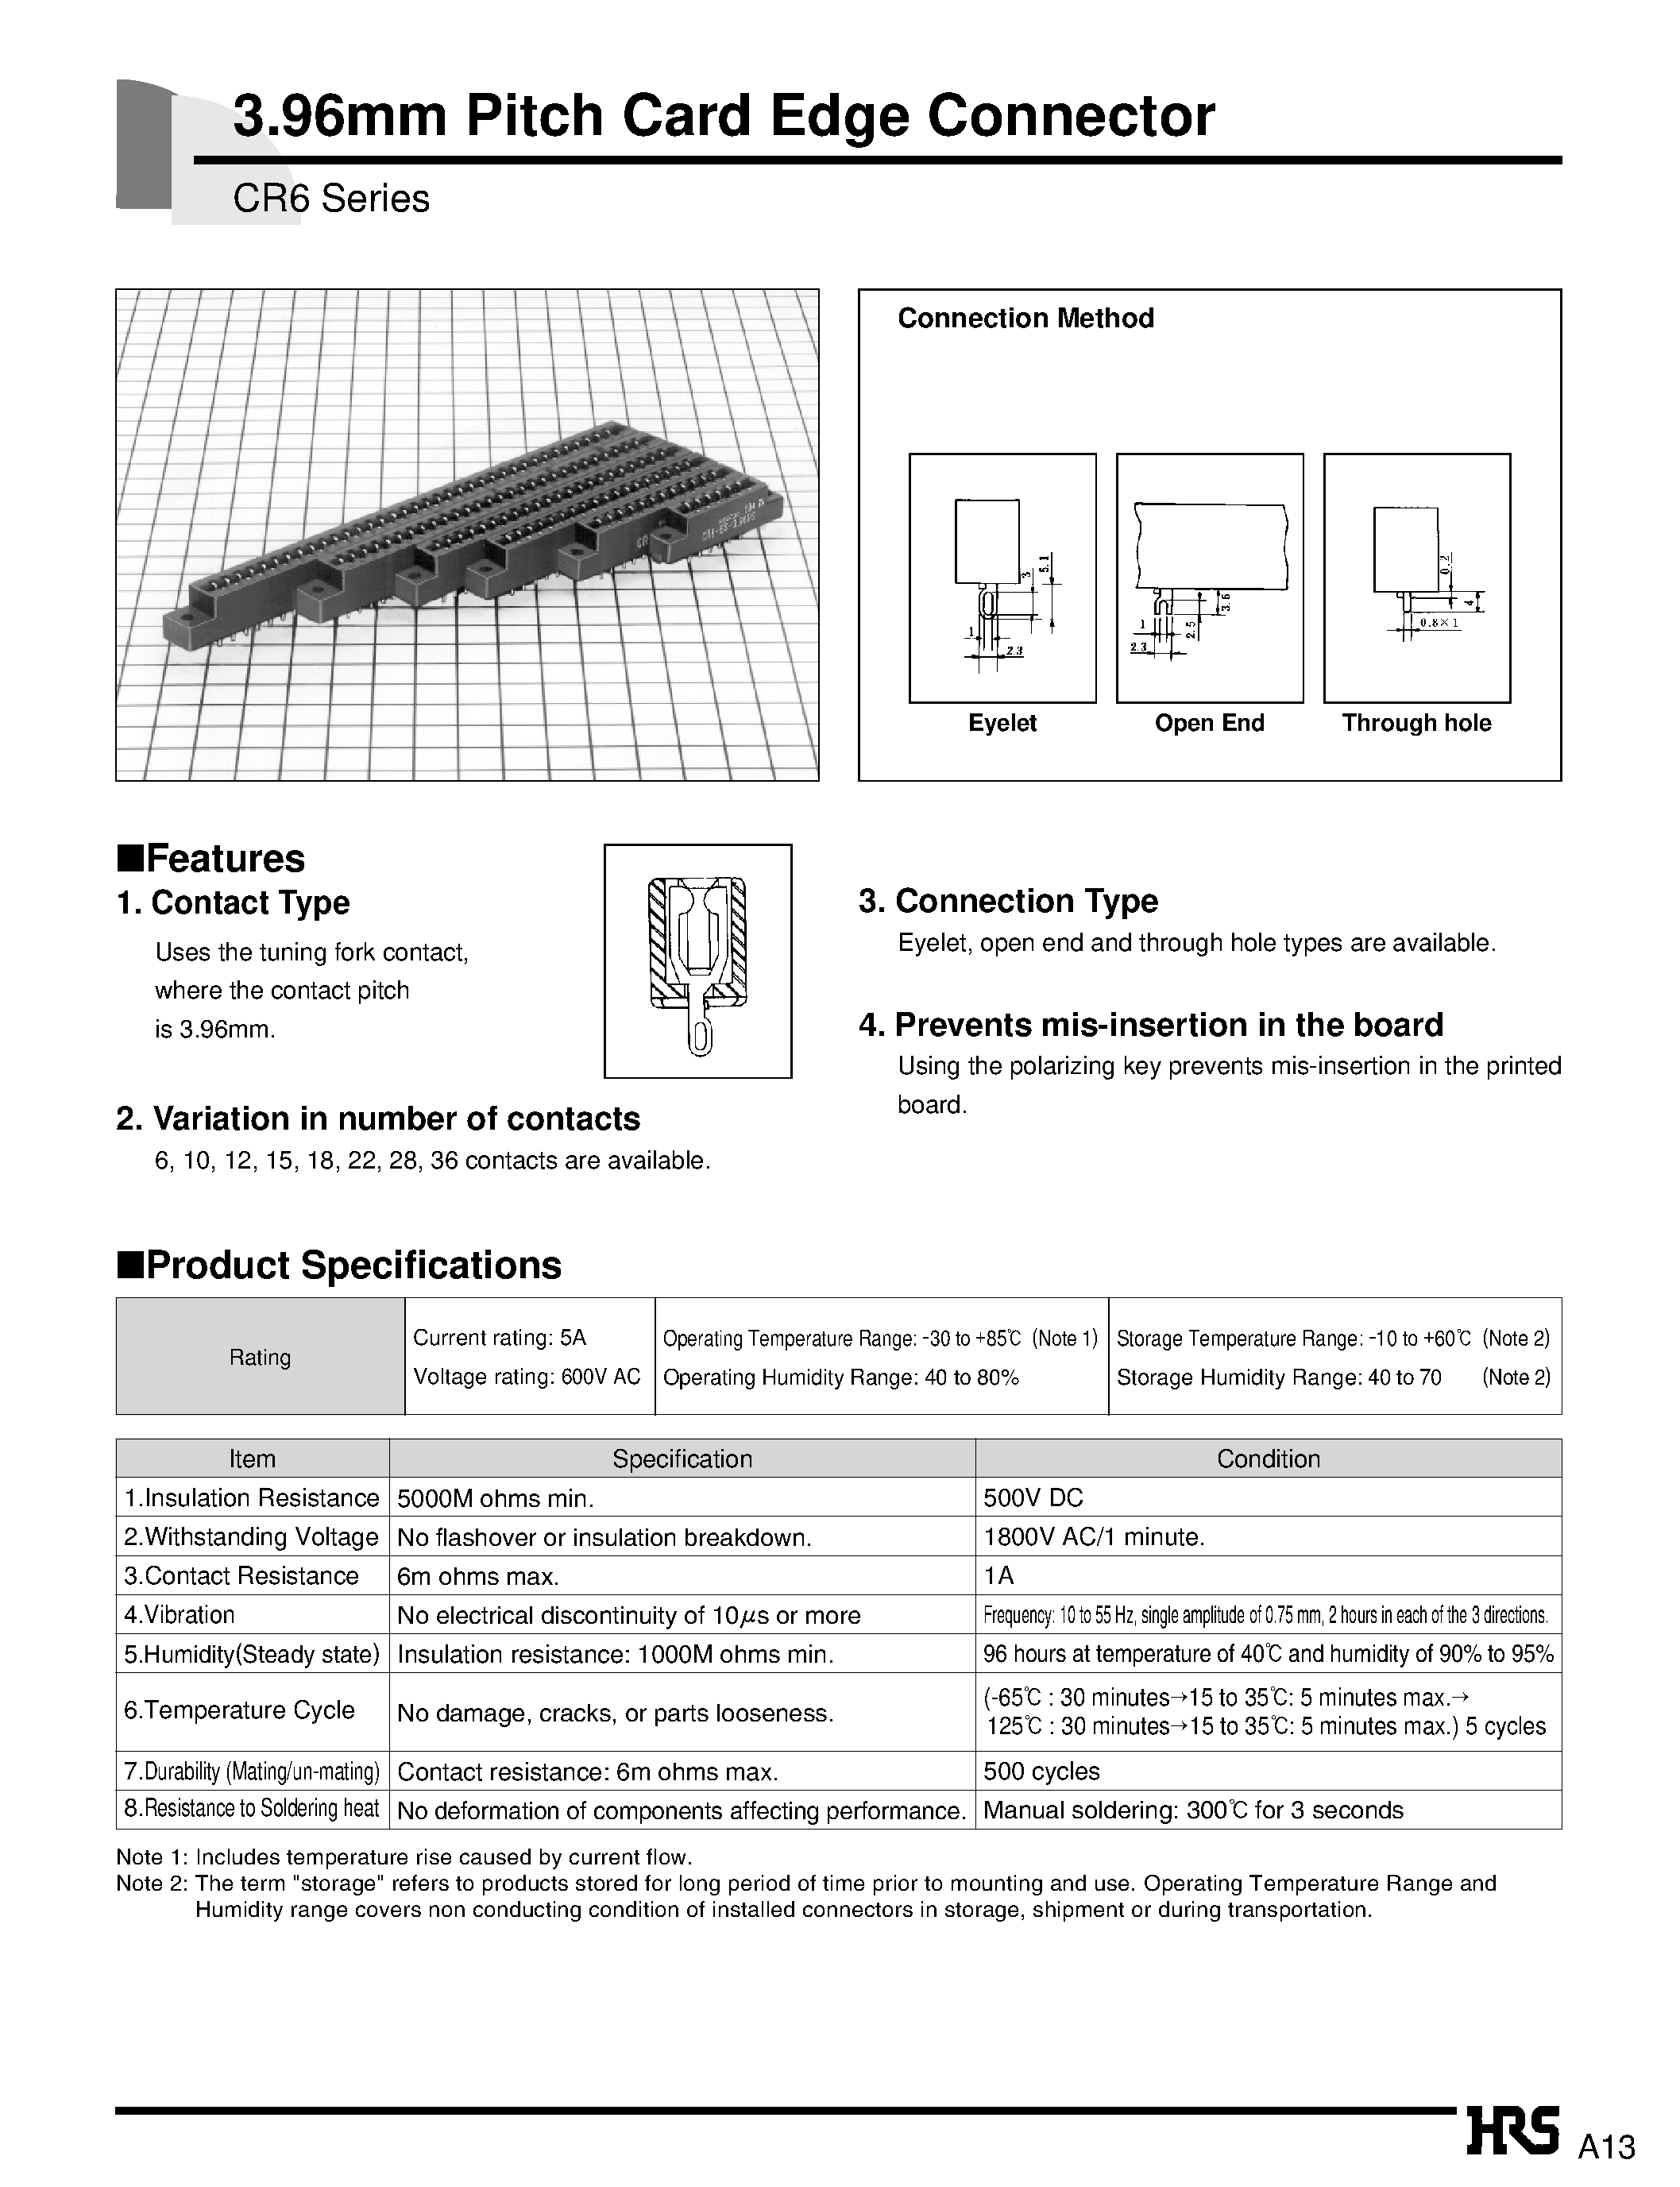 Datasheet CR6-22S-3.96OE - 3.96mm Pitch Card Edge Connector page 1